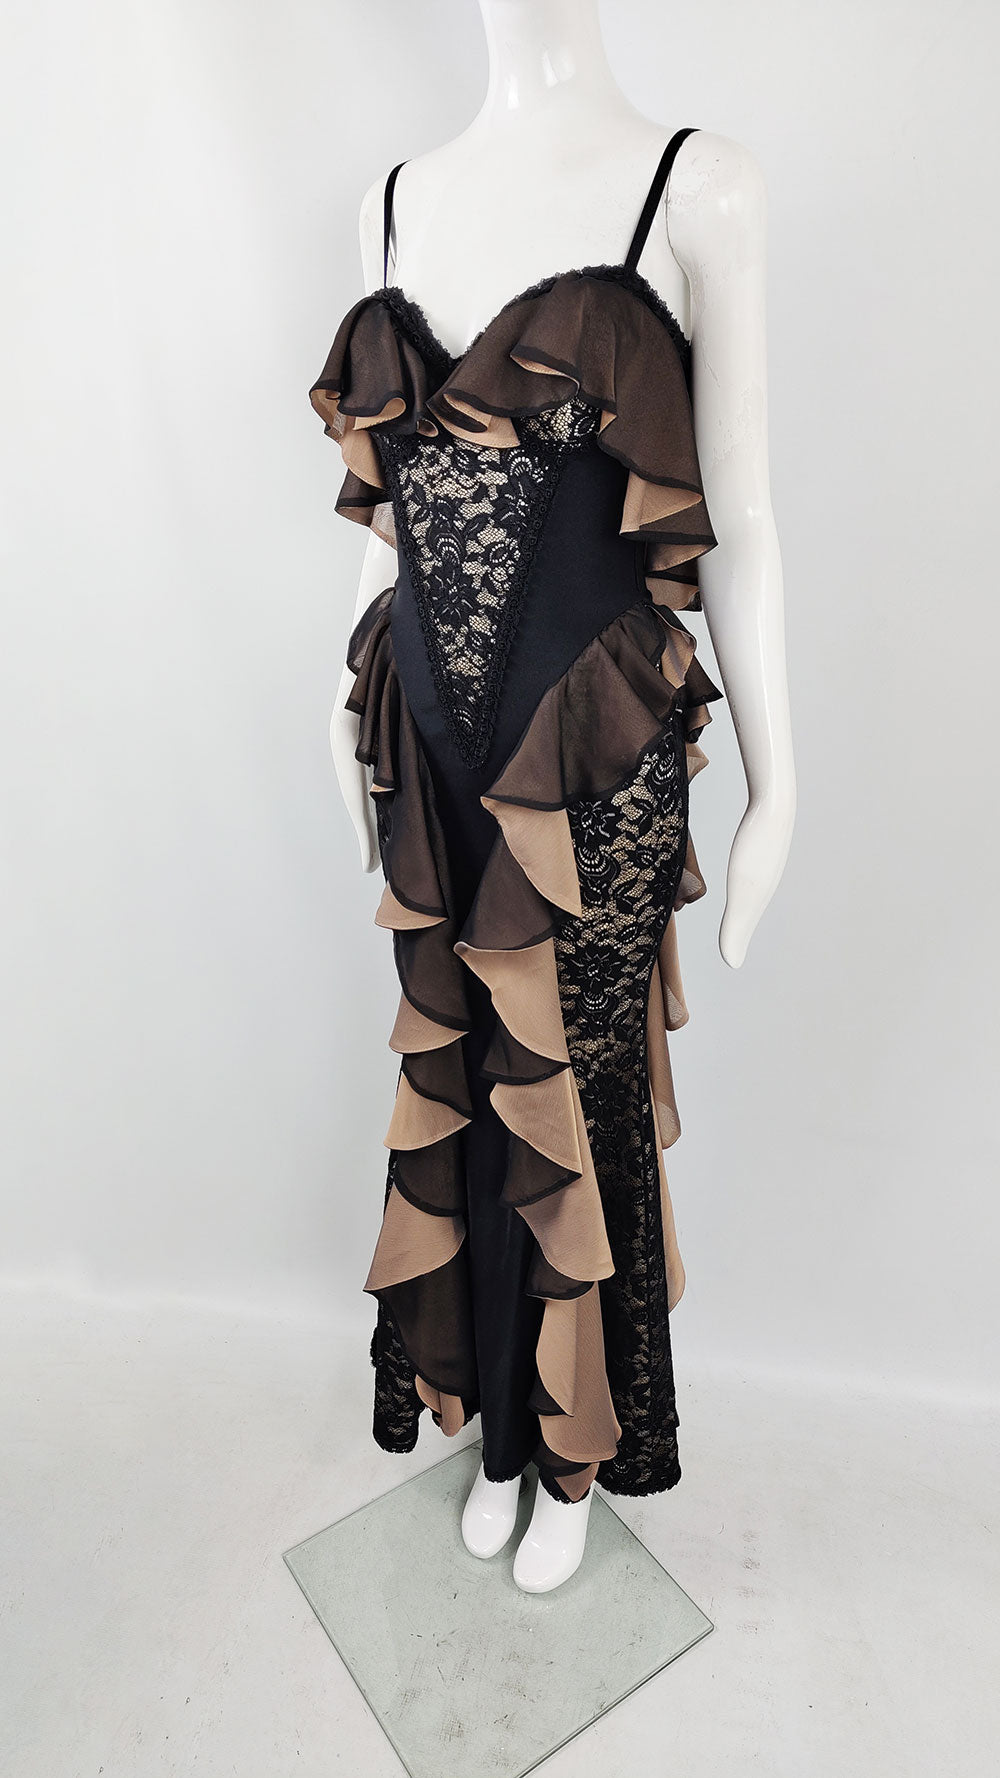 An image of a vintage Catwalk Collection dress from the 90s with lace, satin and chiffon ruffles adding a sexy look.